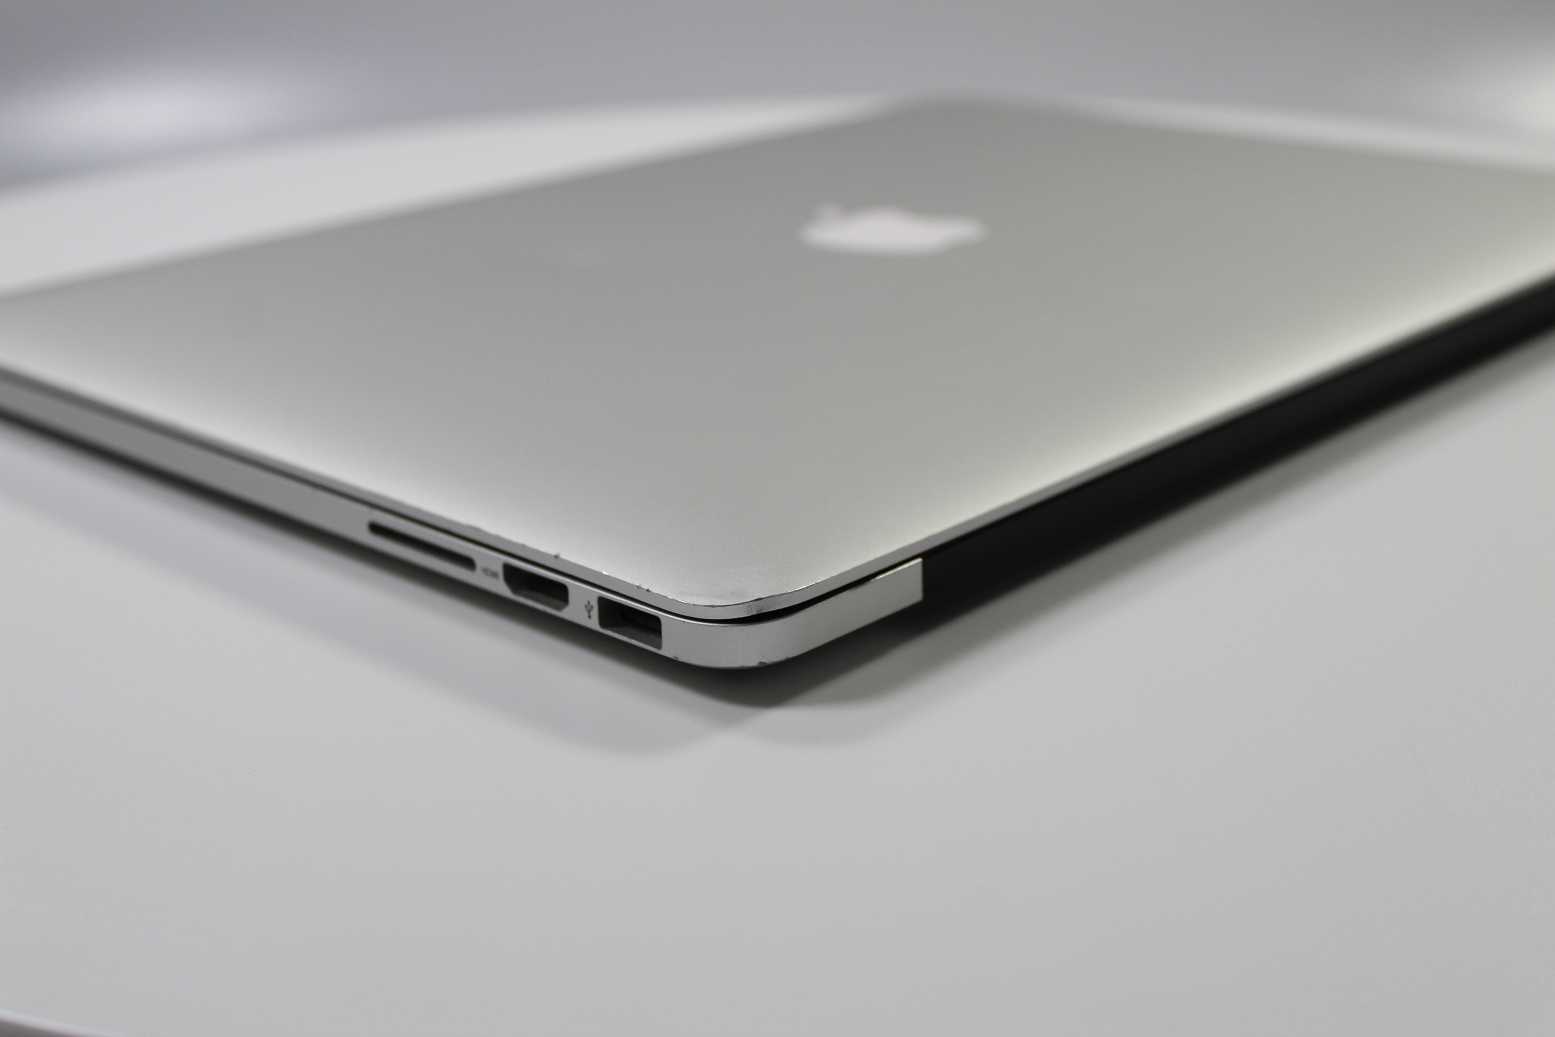 Apple MacBook Pro 15-inch 2014 2.8GHz Core i7 15" 16GB RAM Integrated Graphics (Wear & Tear Special)